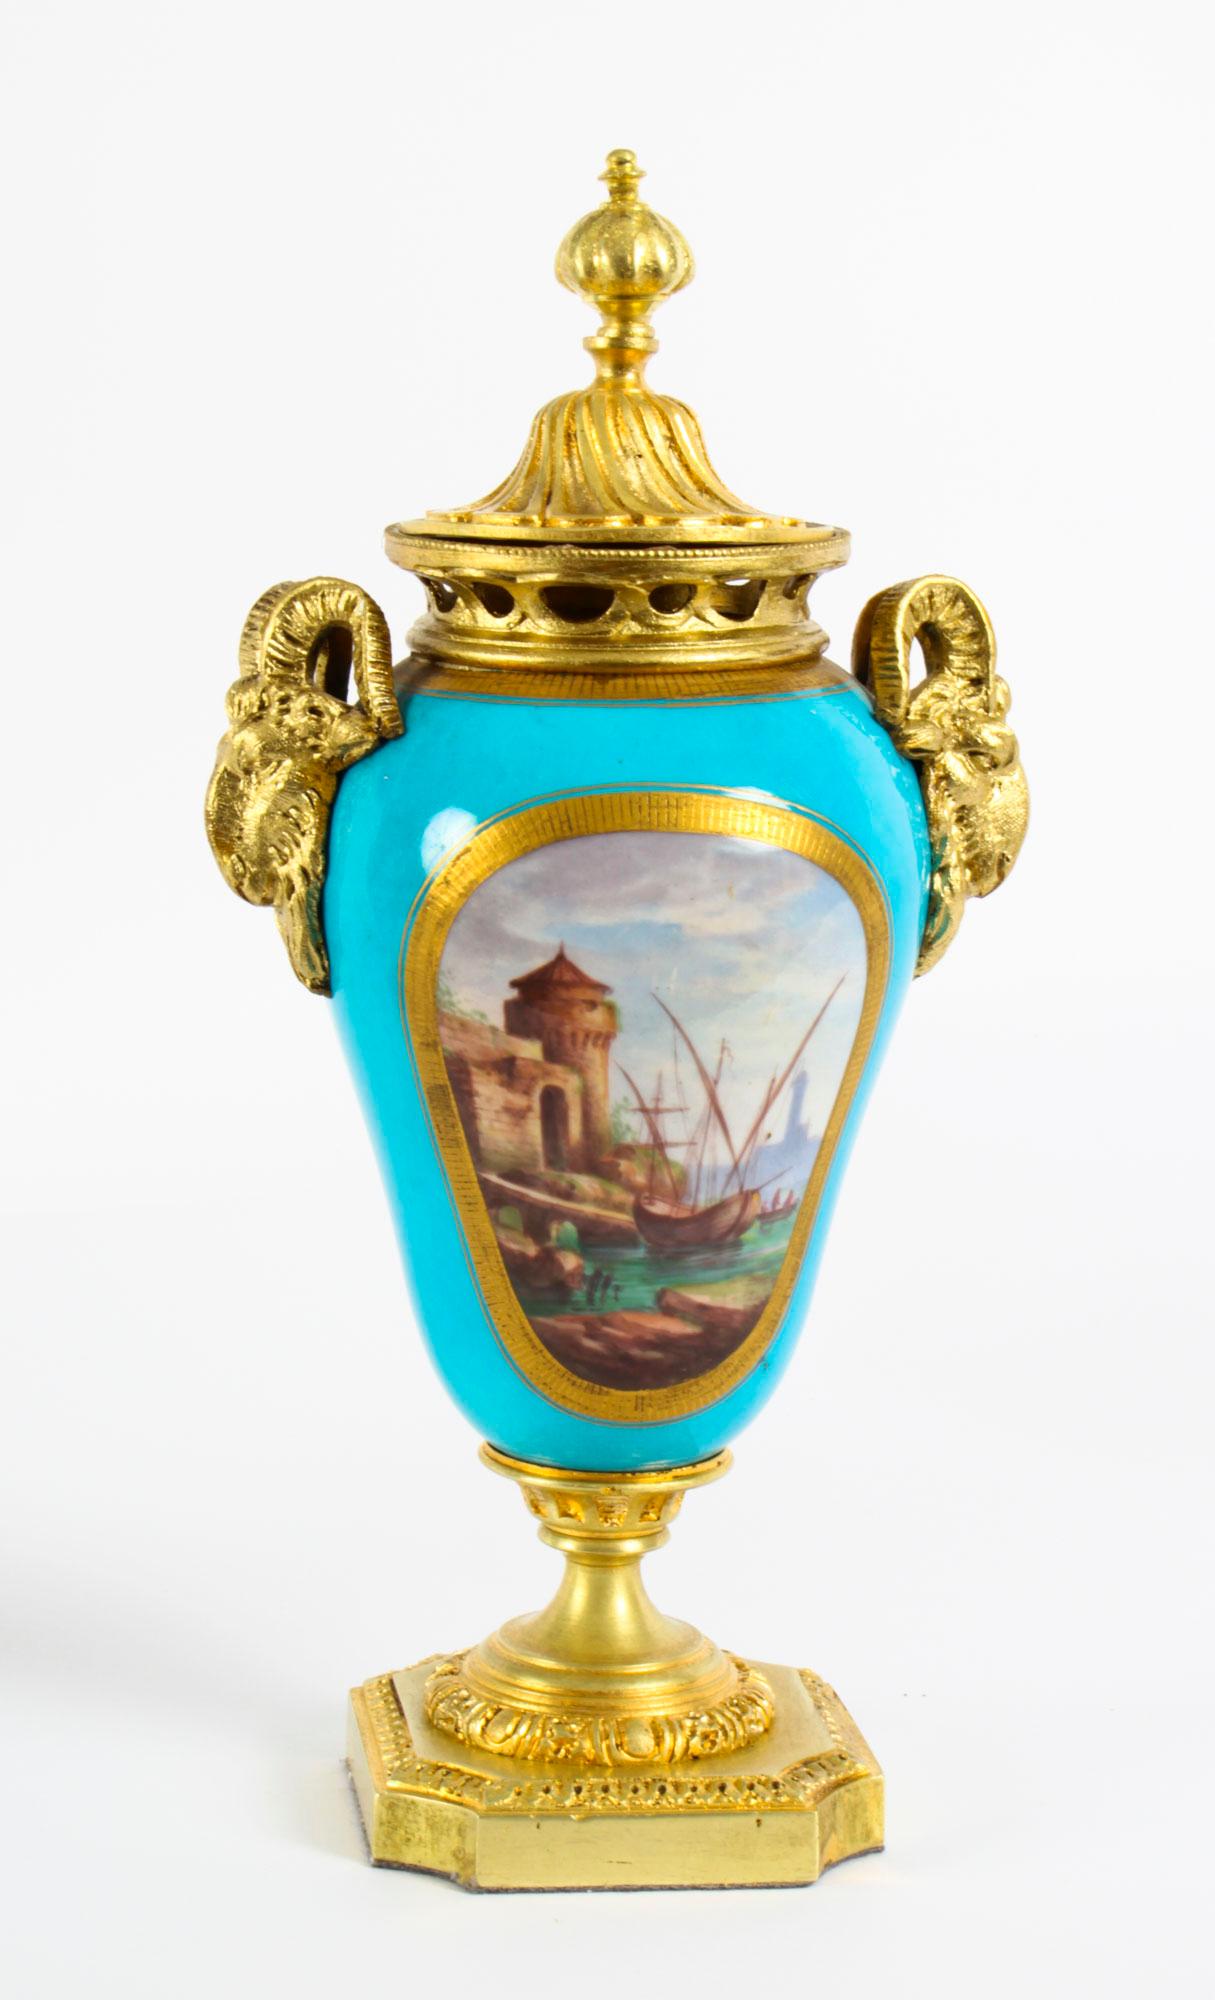 This is a stunning pair of French twin handle ormolu garniture lidded urns with Sèvres hand painted porcelain, circa 1870 in date.

With ecorative ormolu ram head handles and ormolu lids. The porcelain bodies are superbly painted with oval-shaped